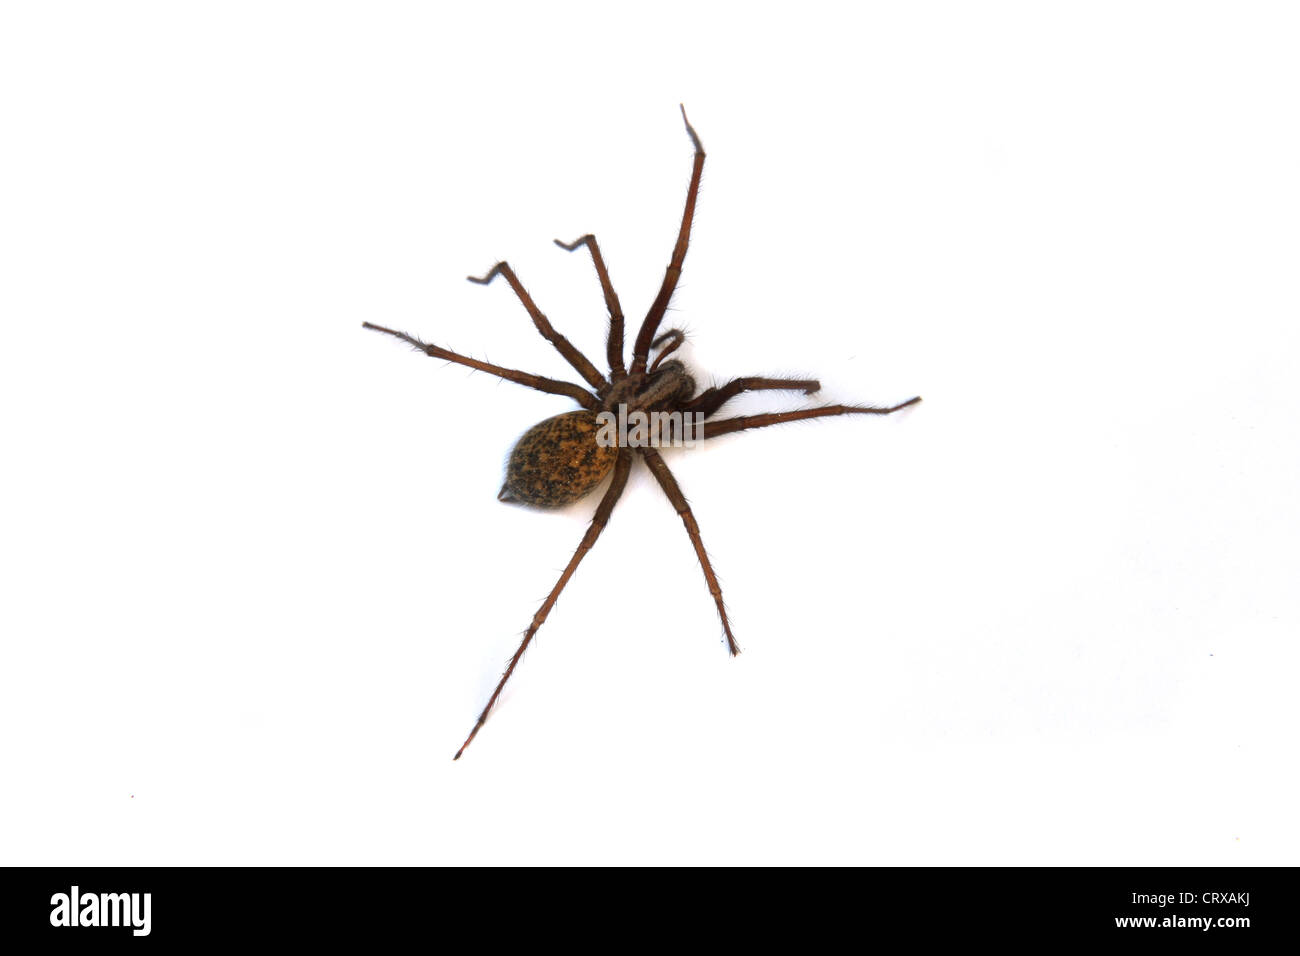 Tegenaria Gigantea or a Common House Spider, found in the UK. Stock Photo